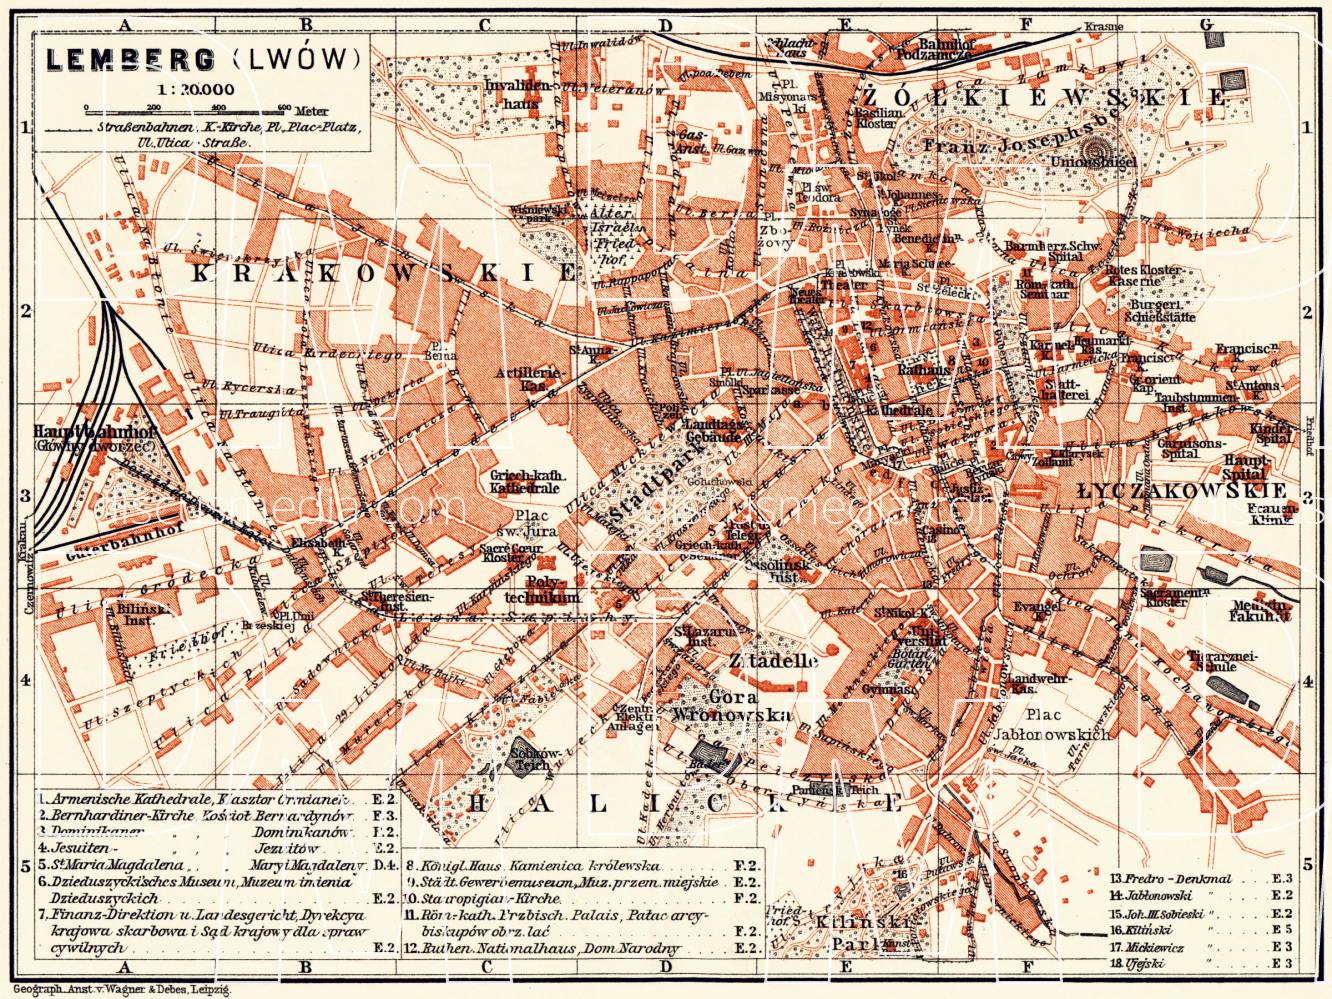 Old map of Lemberg in 1911. Buy vintage map replica poster print or